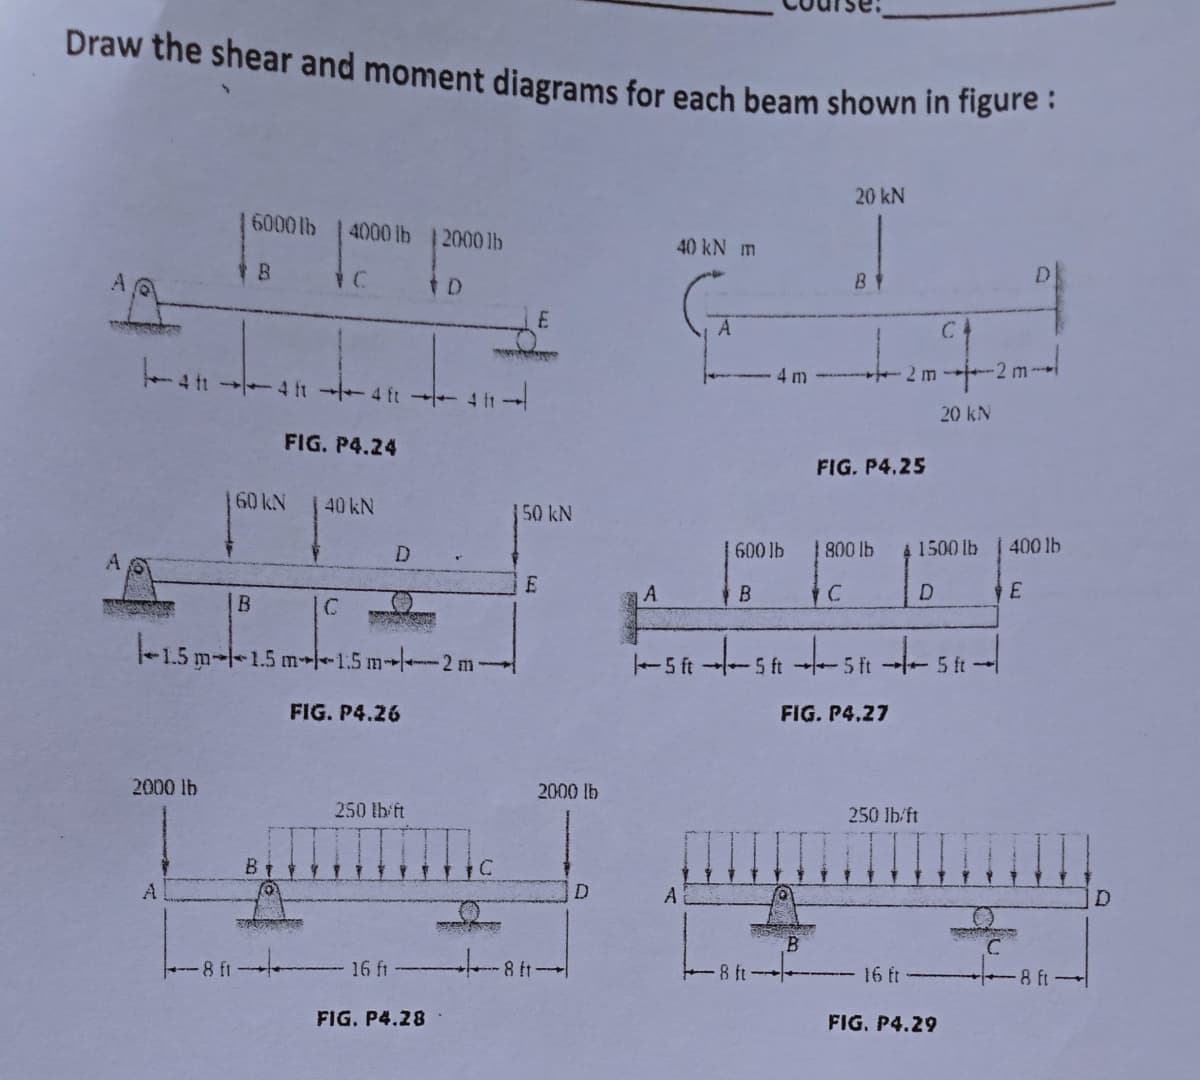 Draw the shear and moment diagrams for each beam shown in figure:
20 kN
6000lb 4000 lb 2000 lb
40 kN m
Y B
BY
A
tD
아
E
q
-4f14f4f-411-
411
20 kN
FIG. P4.24
FIG. P4.25
60 kN
40 kN
600 lb
800 lb
1500 lb 400 lb
D
D
E
A
B
B
|C
SER
-1.5 m 1.5 m-1.5 m2 m
5f5f5f5-
ft
FIG. P4.27
FIG. P4.26
2000 lb
250 lb/ft
16 ft
FIG. P4.28
-8 ft
B
Q
PER
50 kN
E
8 ft
2000 lb
D
A
4 m
Q
SE
8 ft·
B
2 m
250 lb/ft
16 ft
FIG. P4.29
2 m-
C
18 ft 1
D